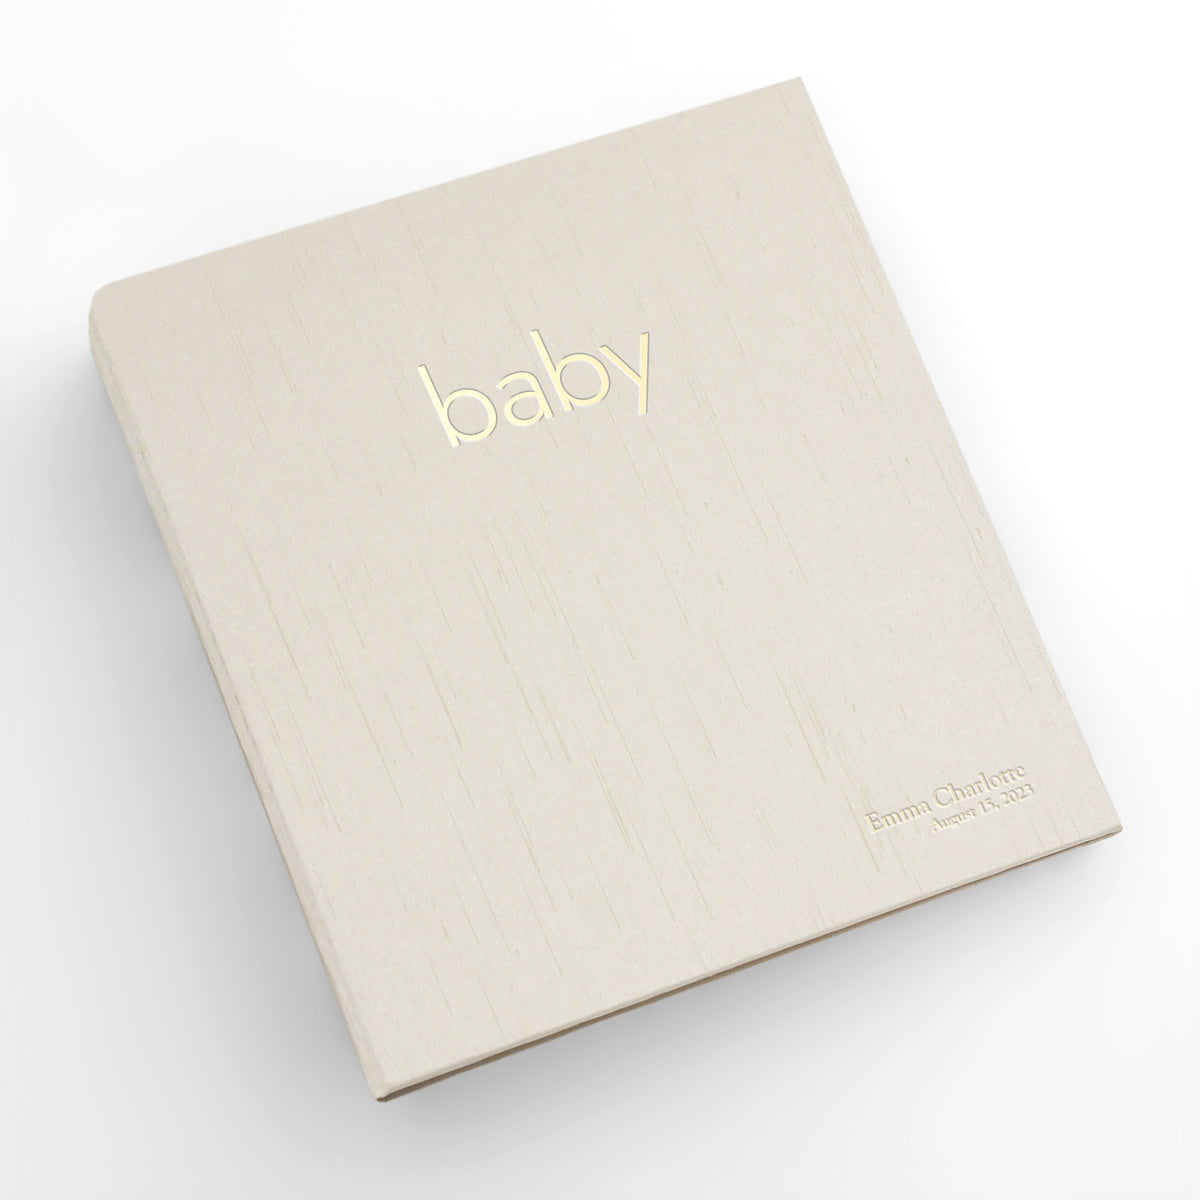 Personalized Baby Memory Binder with Champagne Silk Cover | Select Your Own Pages